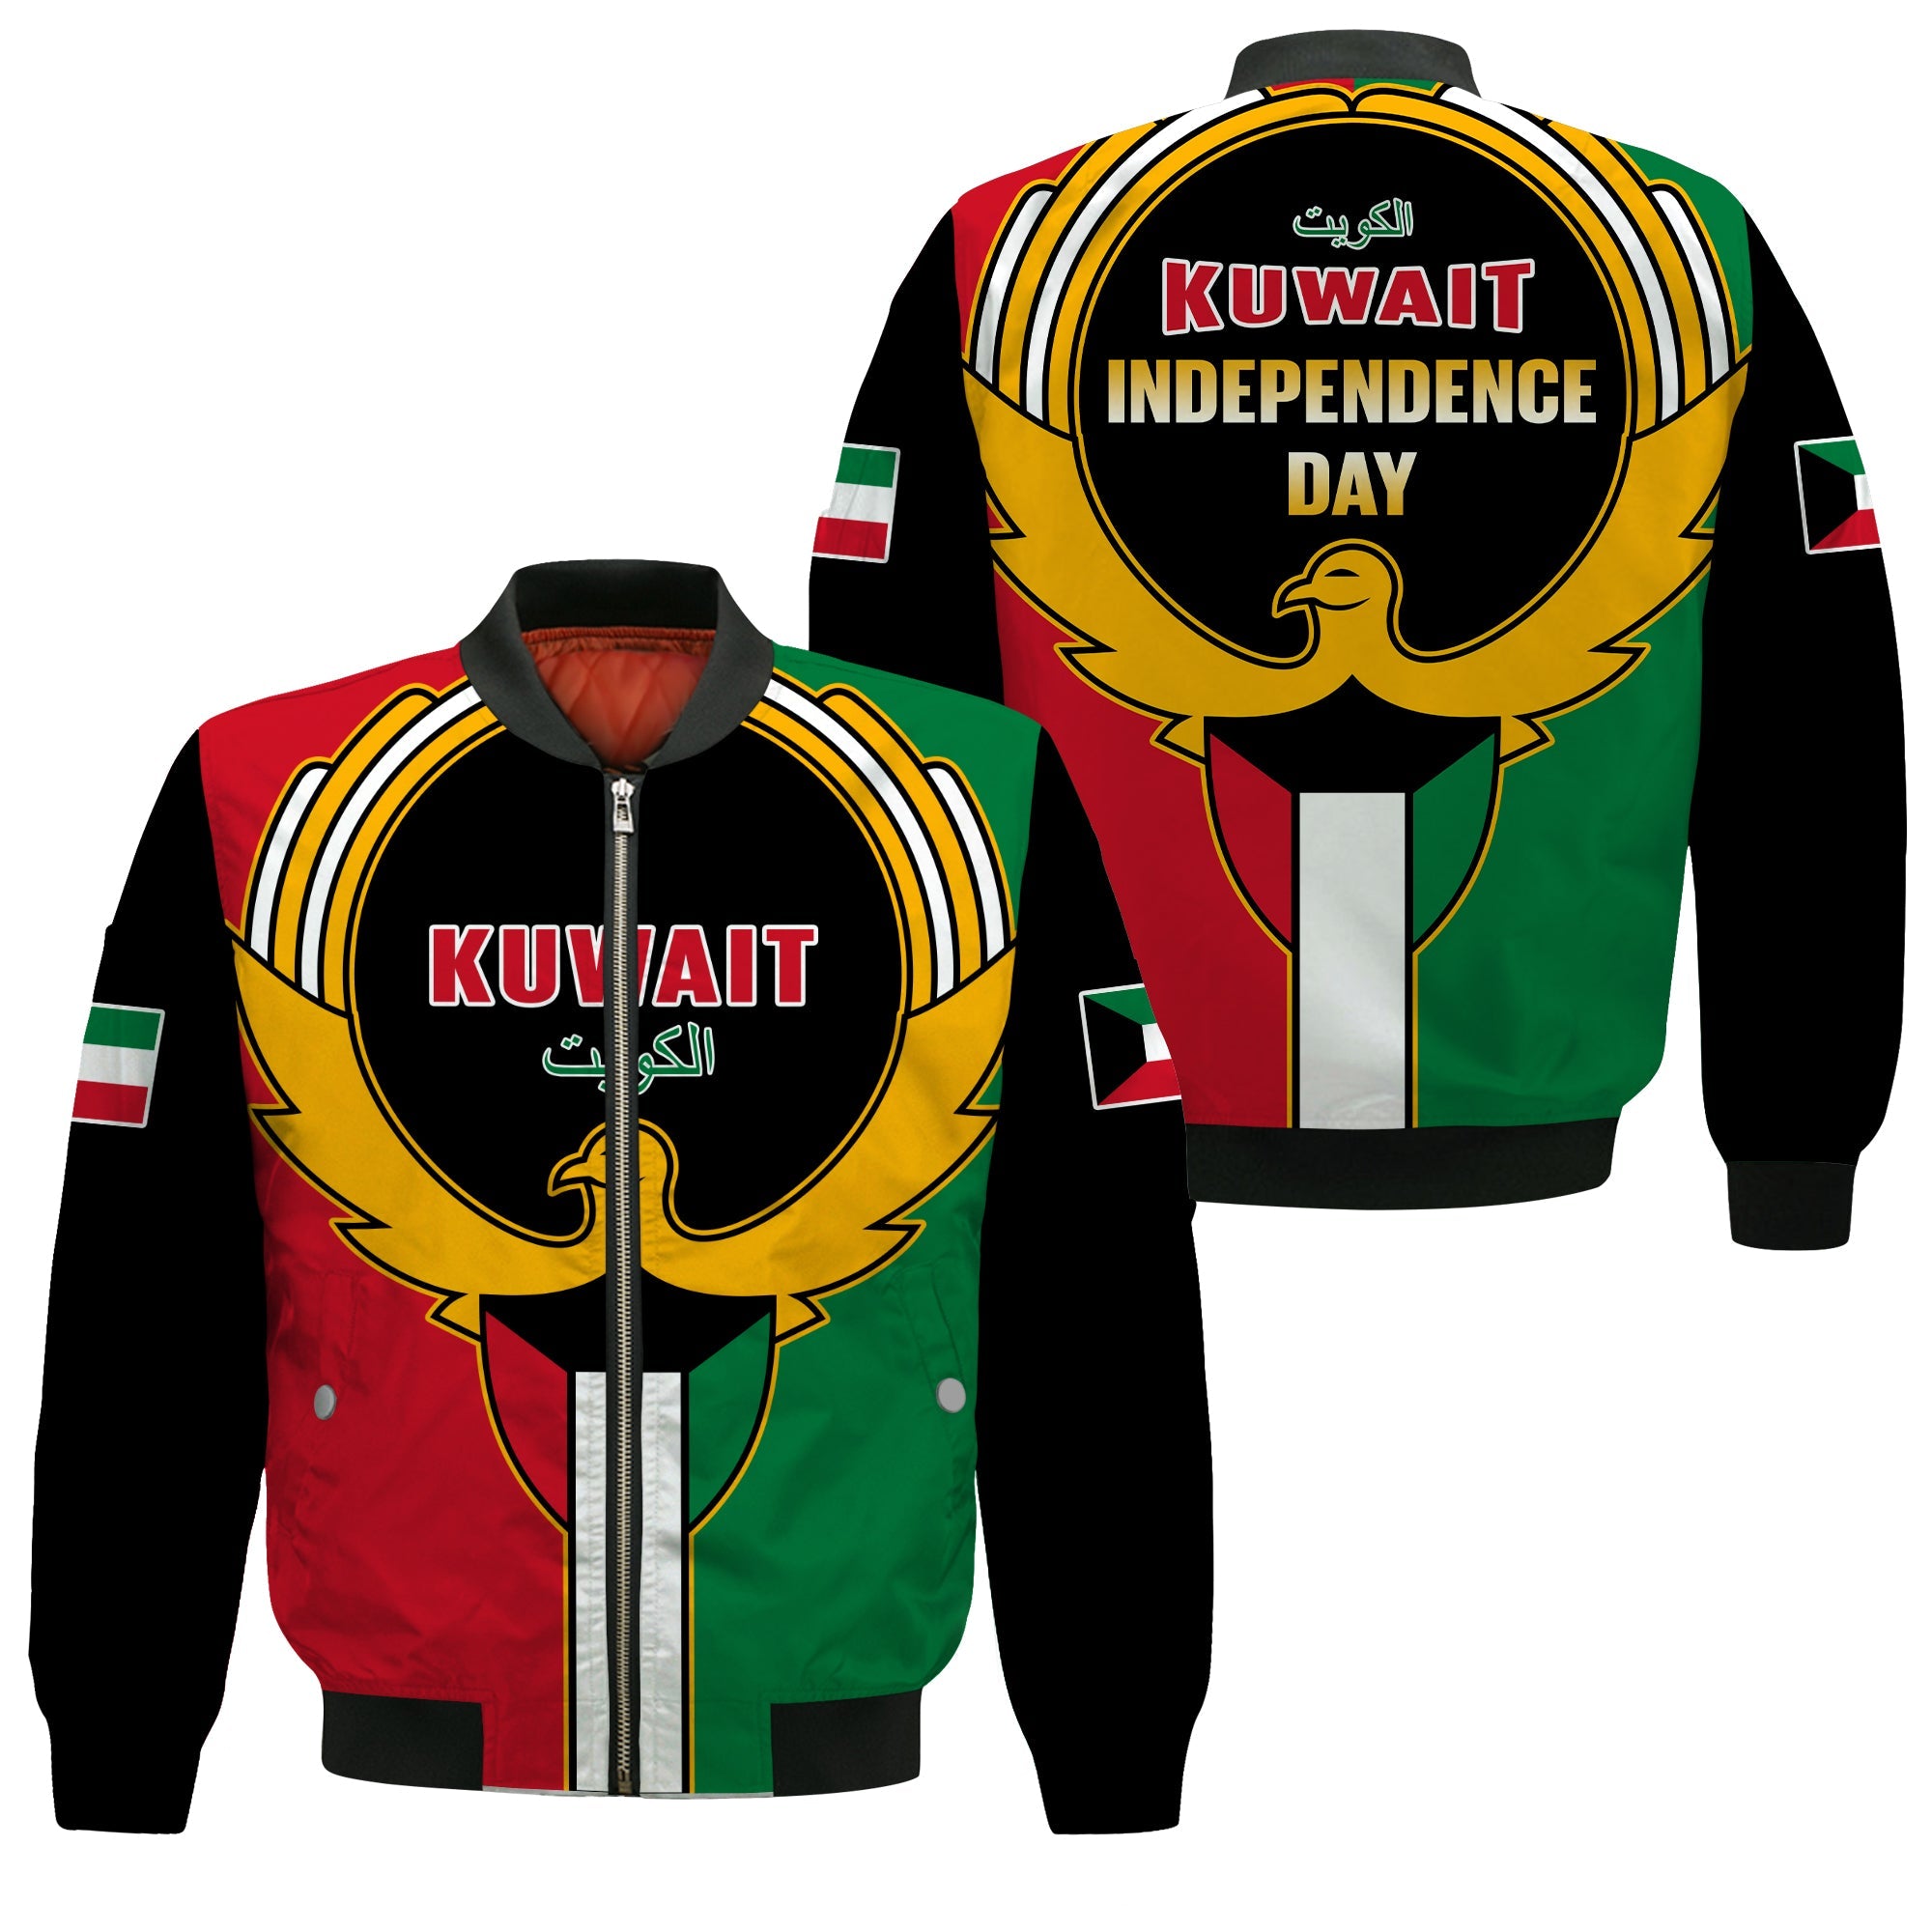 kuwait-bomber-jacket-happy-independence-day-with-coat-of-arms